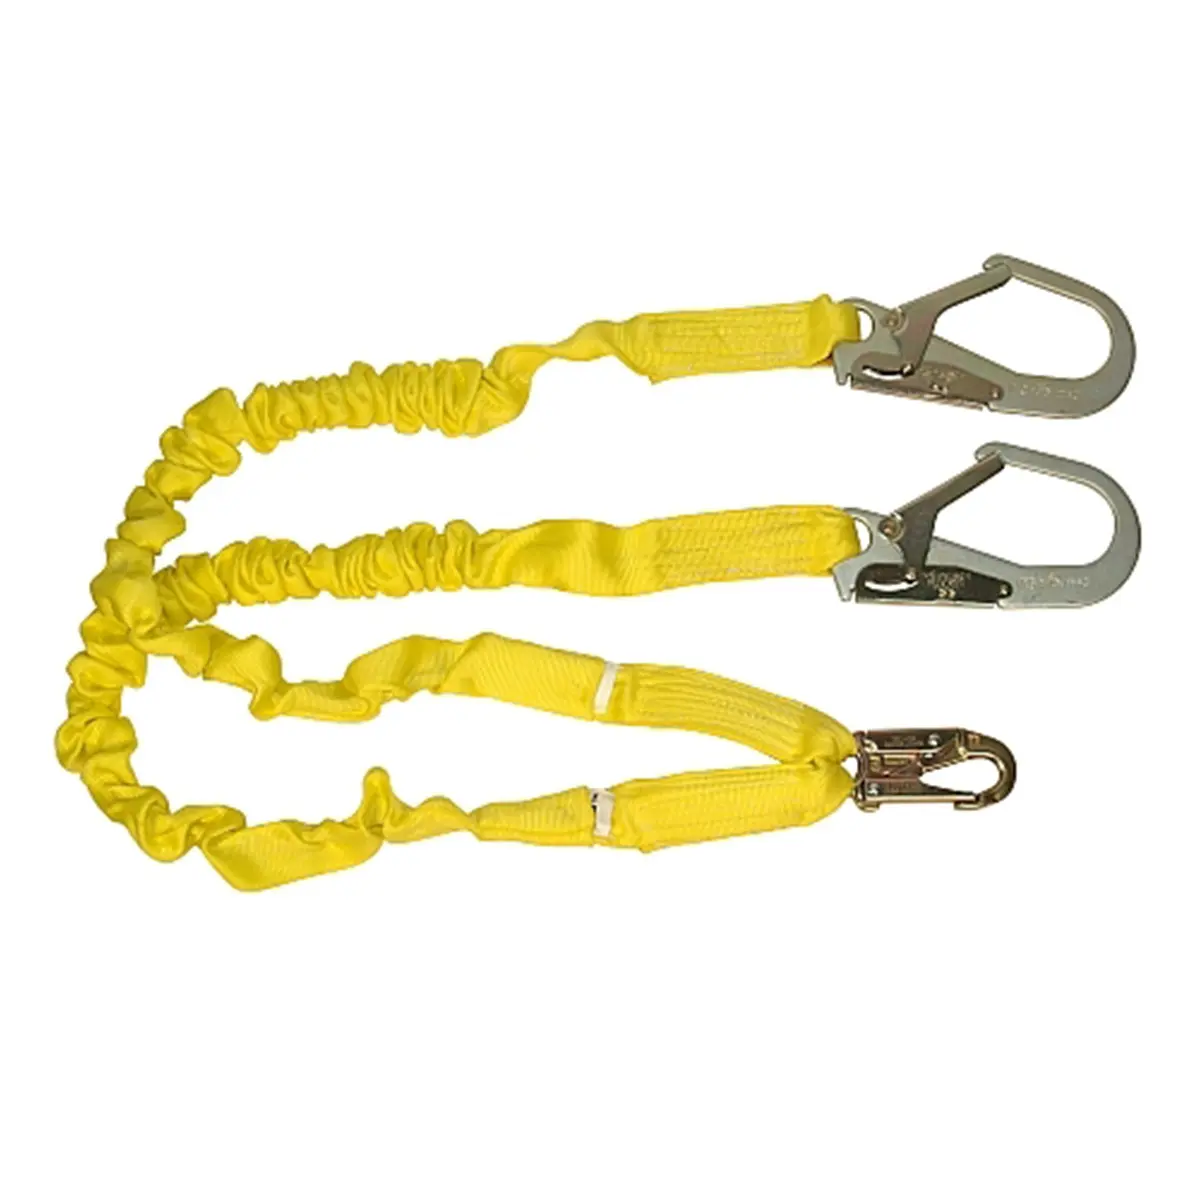 Customizable Stretch Fall Protection Lanyard Double Leg with Rebar Hooks for Shock Absorbing